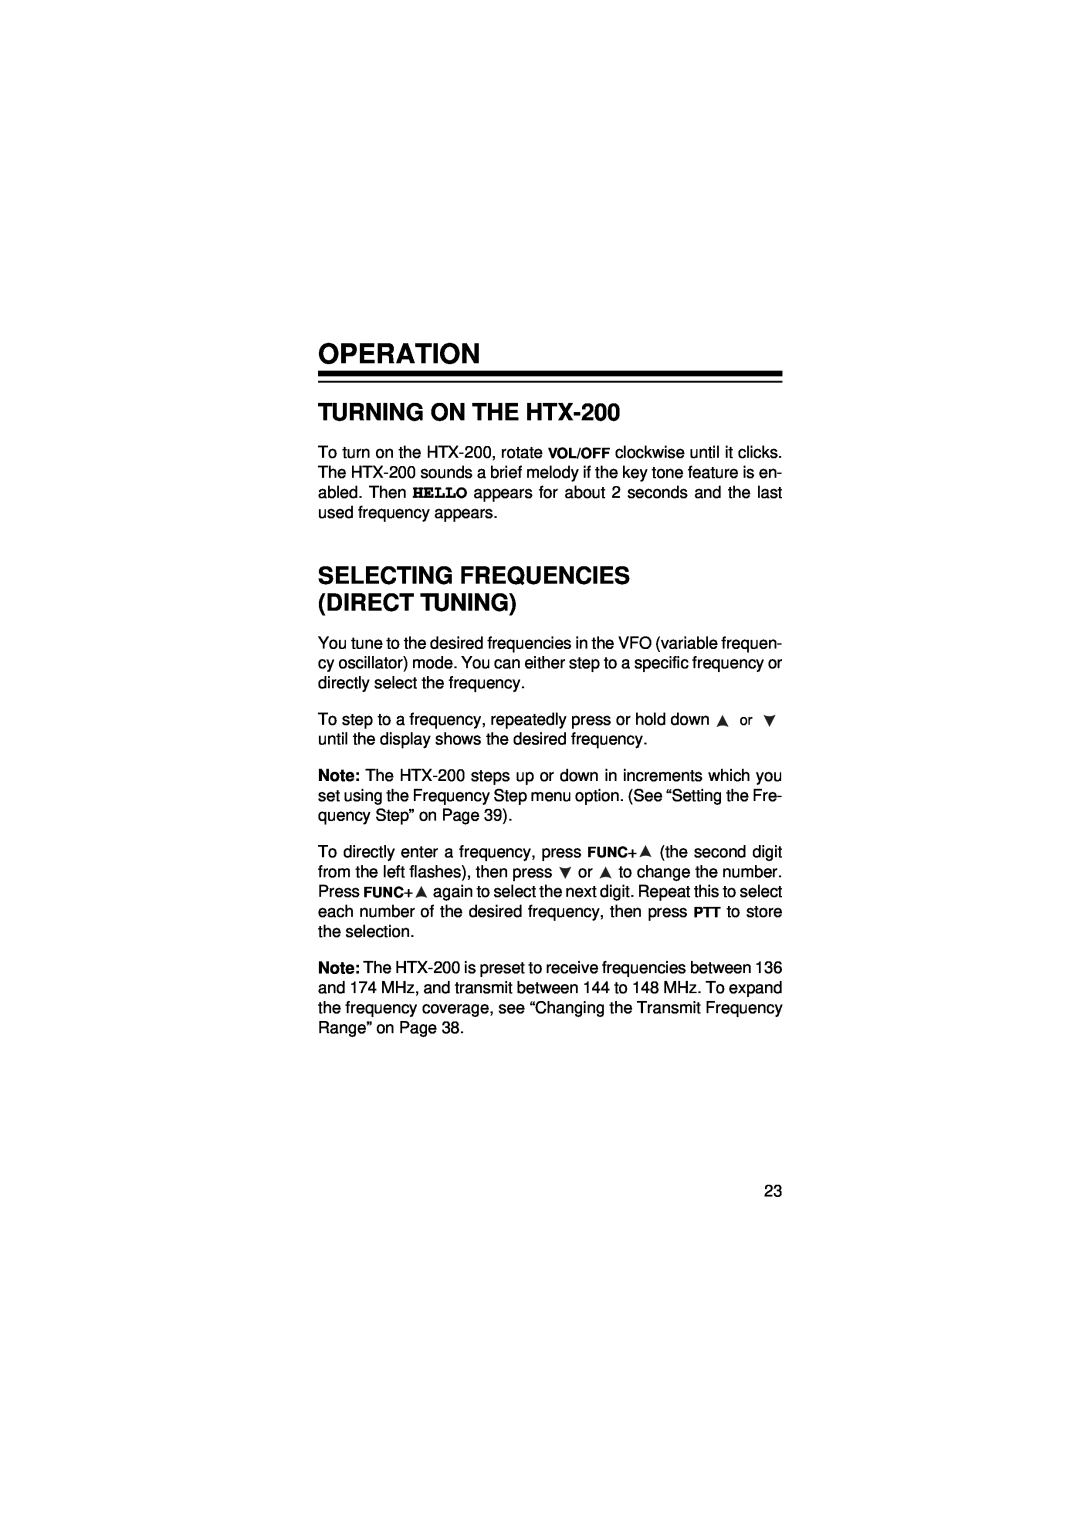 Radio Shack owner manual Operation, TURNING ON THE HTX-200, Selecting Frequencies Direct Tuning 